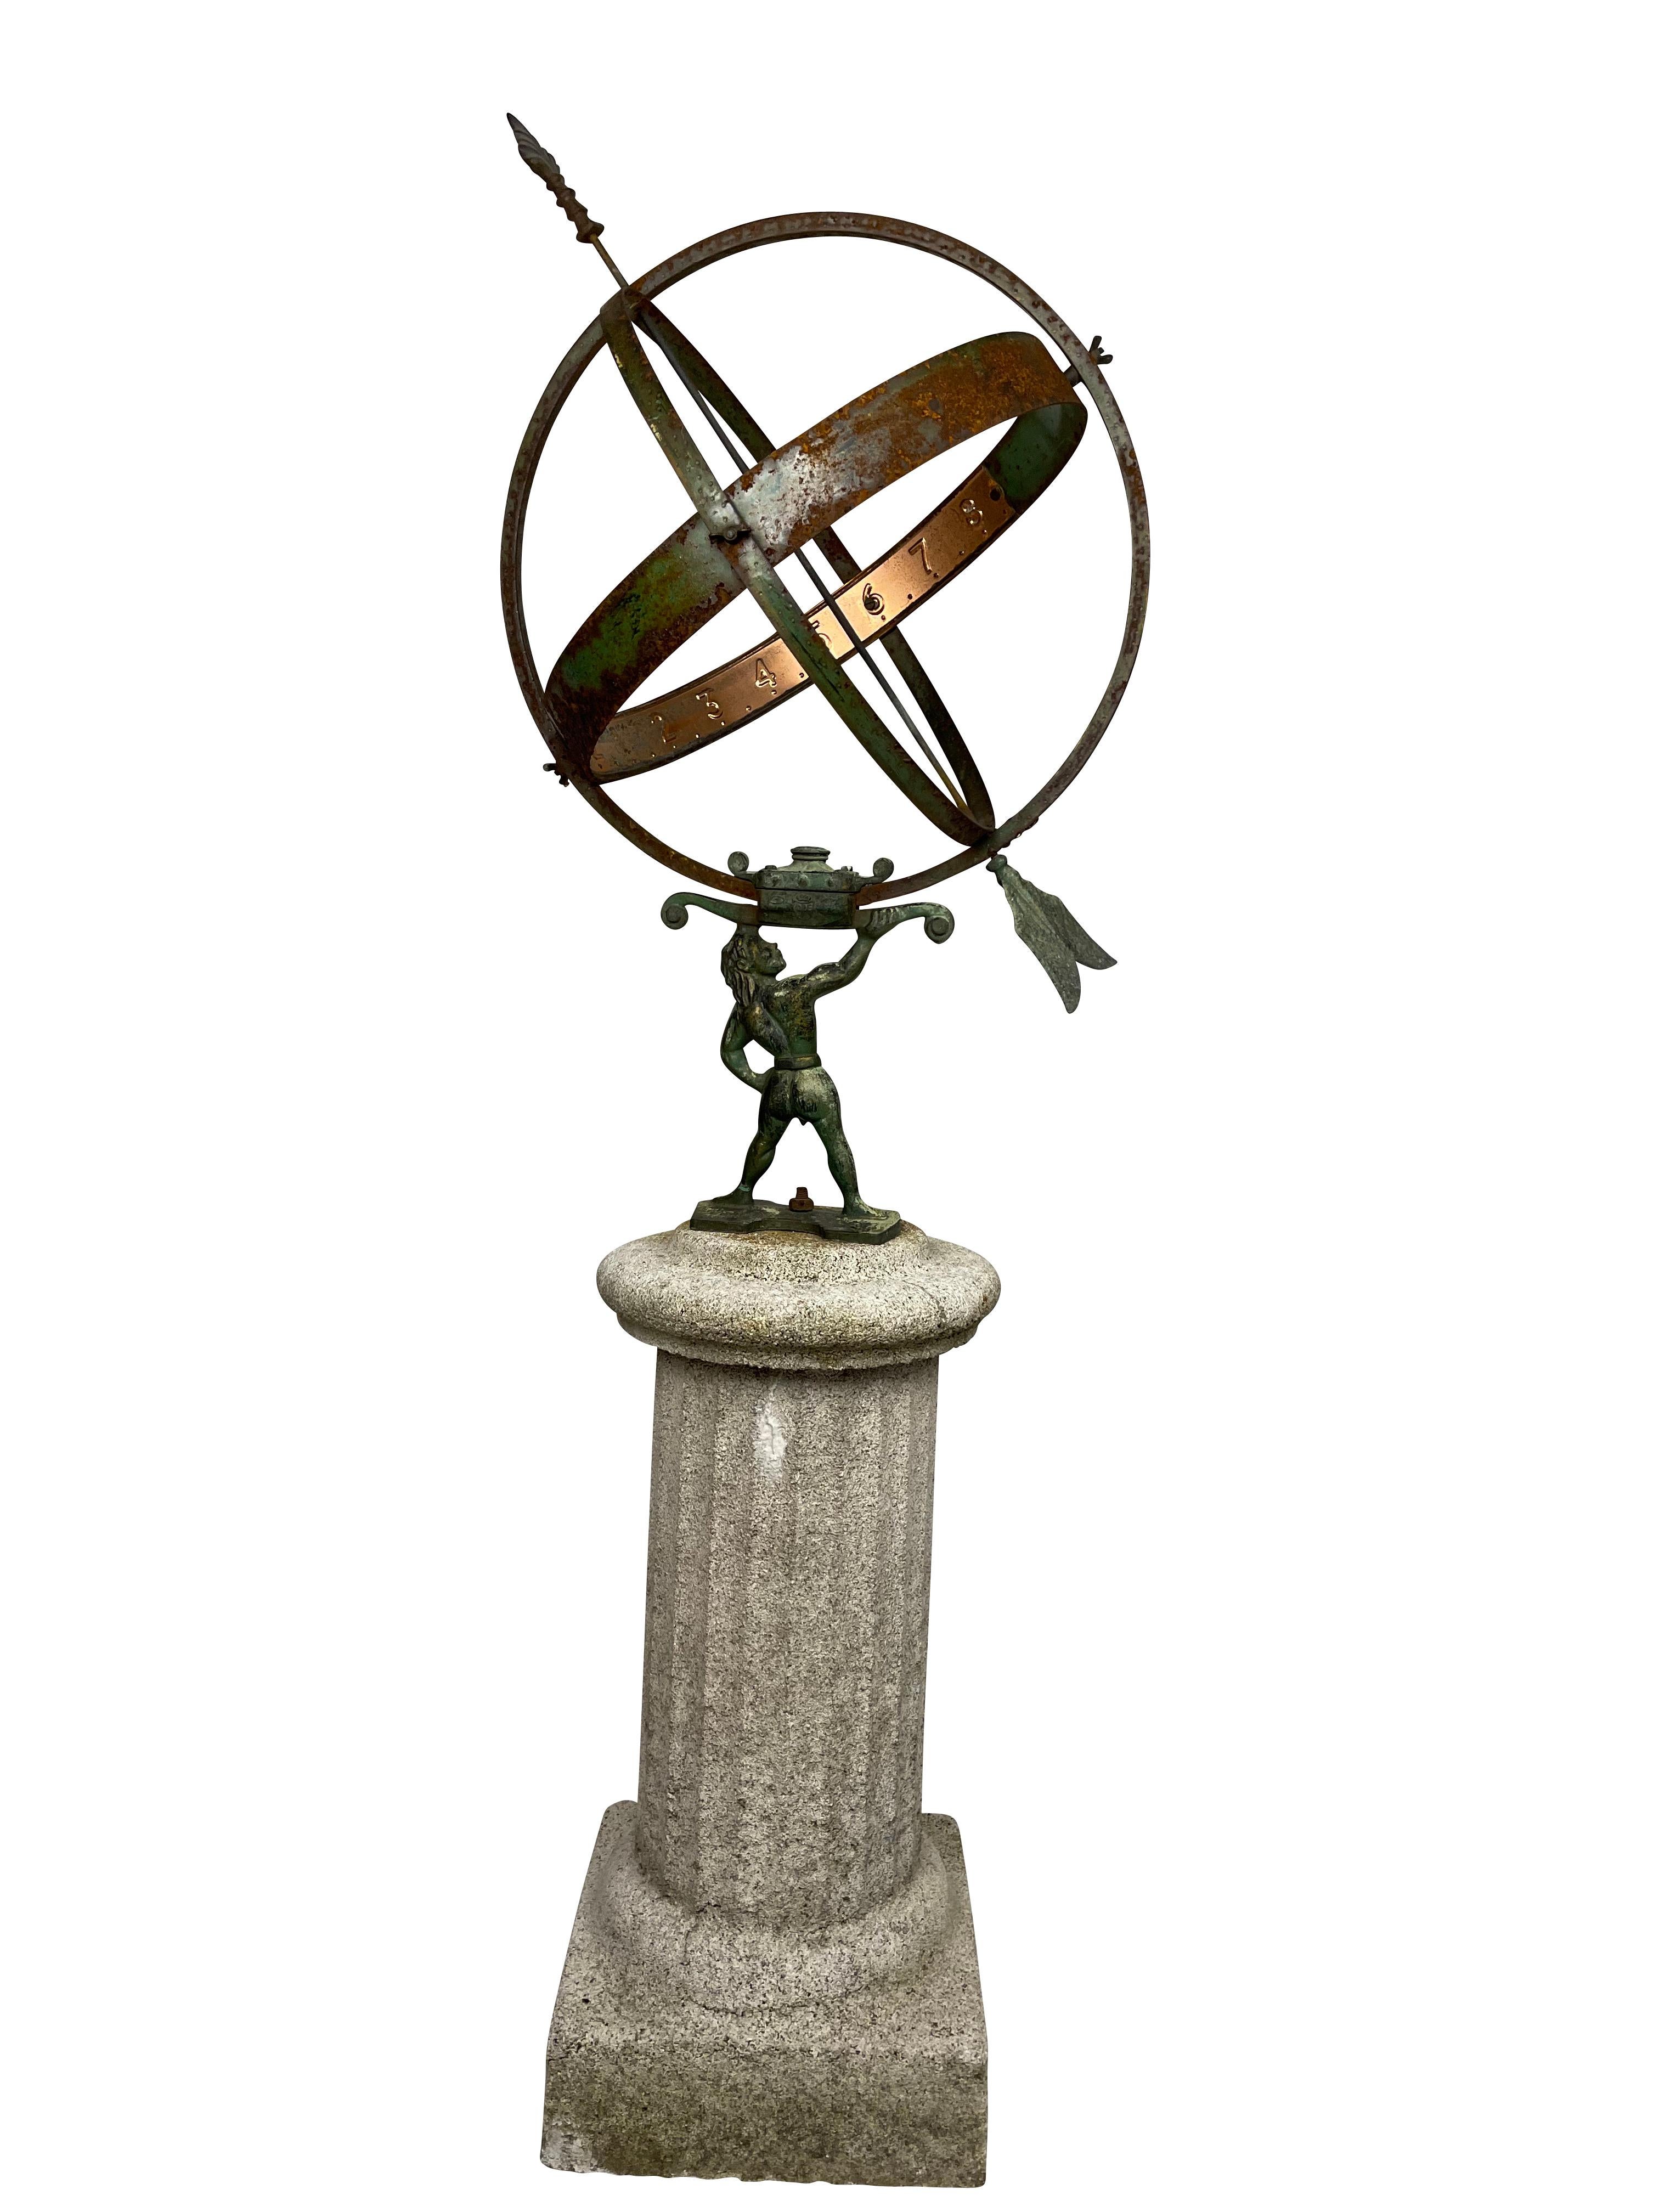 This is a vintage metal Swedish armillary of Atlas mounted on a vintage cement reeded plinth. The armillary is supported on the arm of Atlas and there is banding with copper numerals on it. Imported from Sweden. The two are a lovely pairing as a